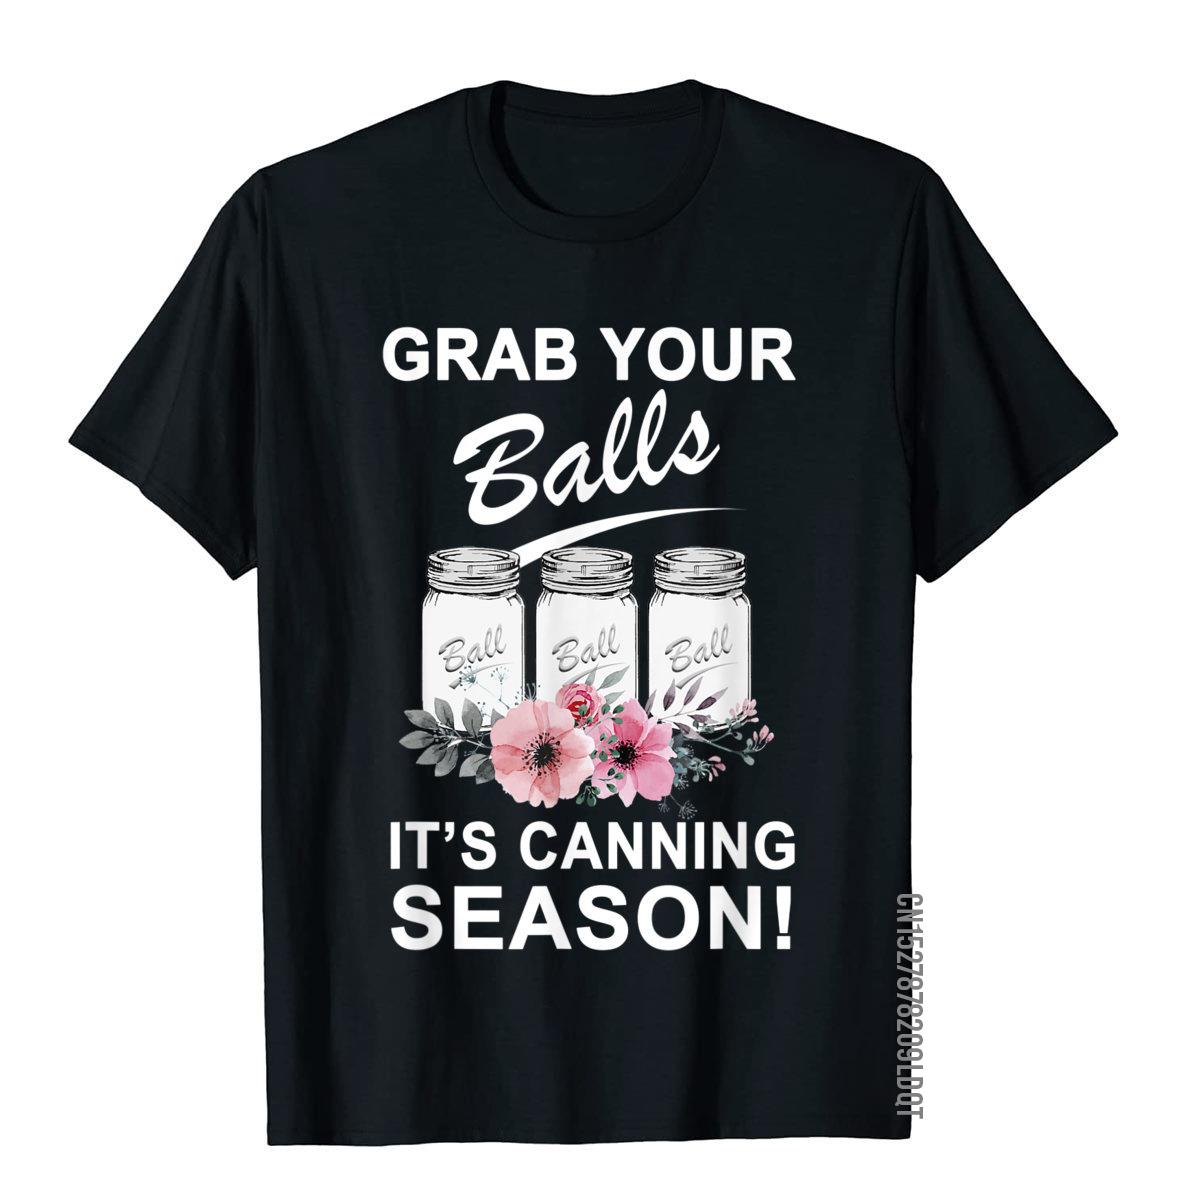 Grab Your Balls It'S Canning Season Funny Gag Gift T-Shirt Cotton Tops T Shirt For Students Casual T Shirt Tight Company S-4XL-5XL-6XL